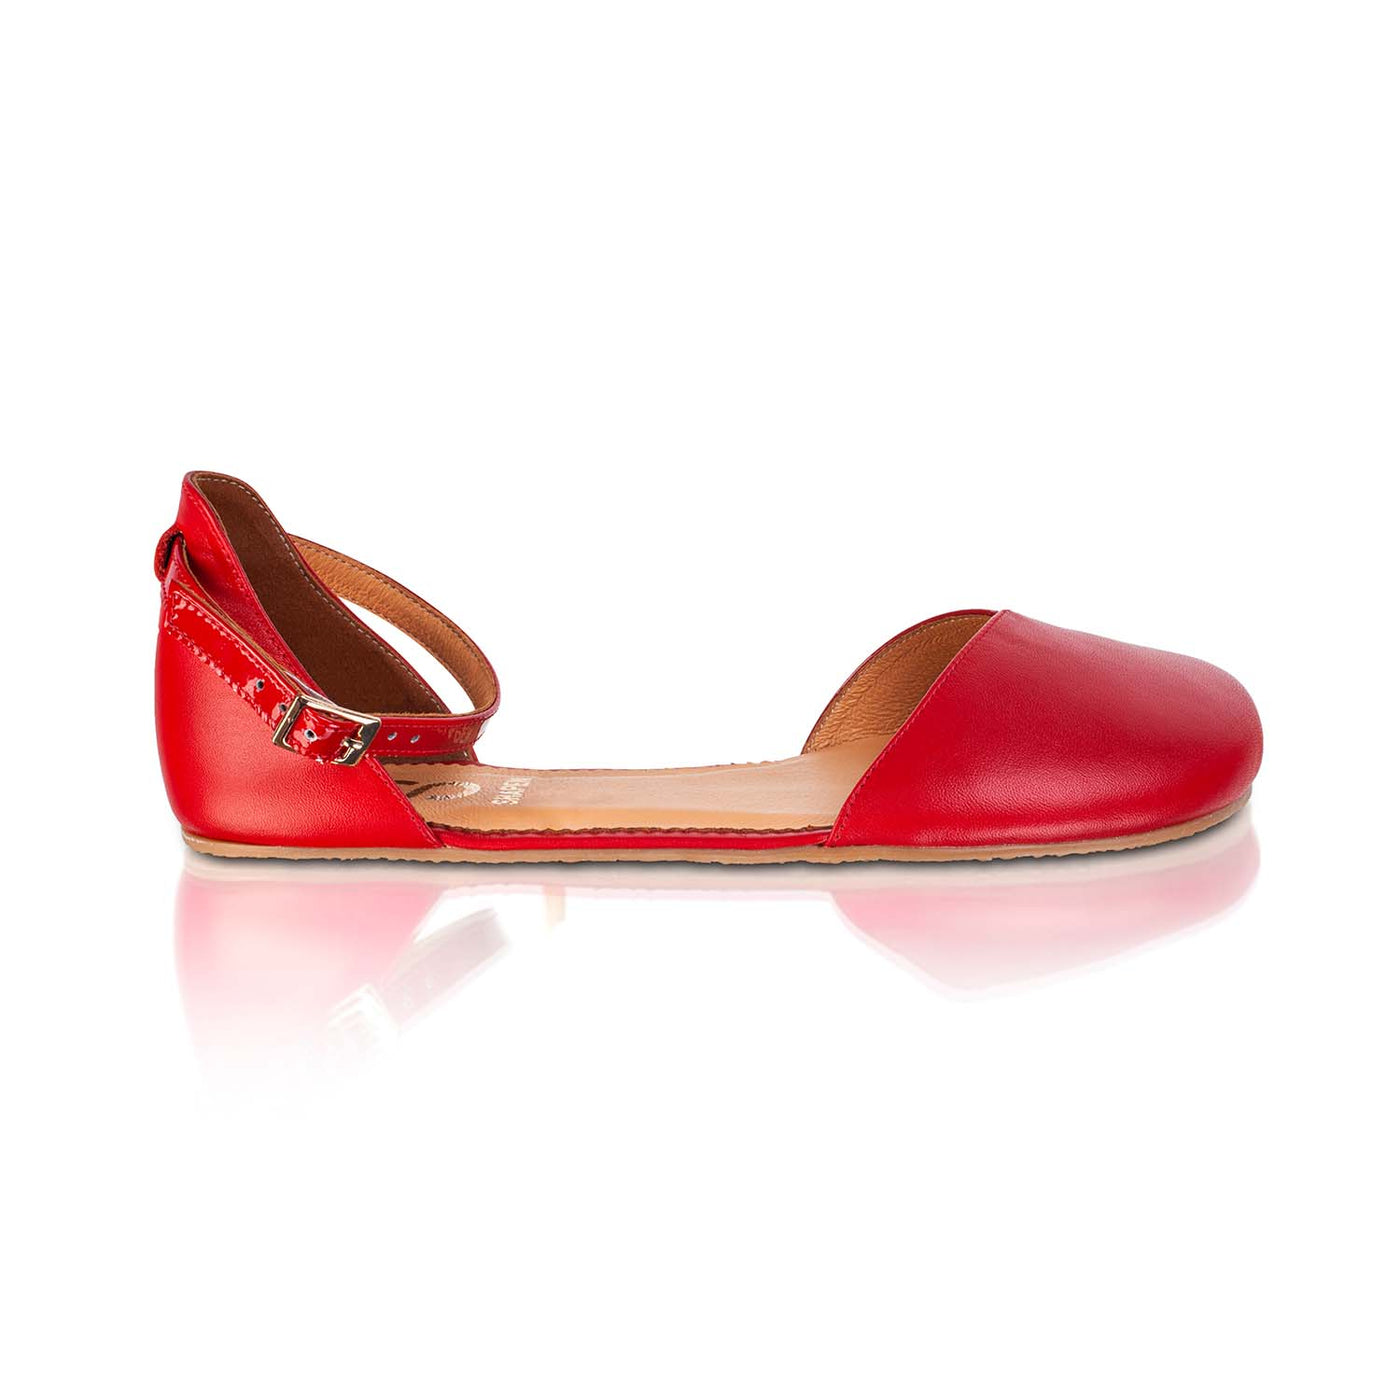 A photo of Shapen Poppy D’orsay dressy flats with a leather upper and rubber soles. The flats are a cherry red color with a heel cup and dainty ankle strap, the inside of the sole are a beige color. Right flat is shown from the right against a white background. #color_red